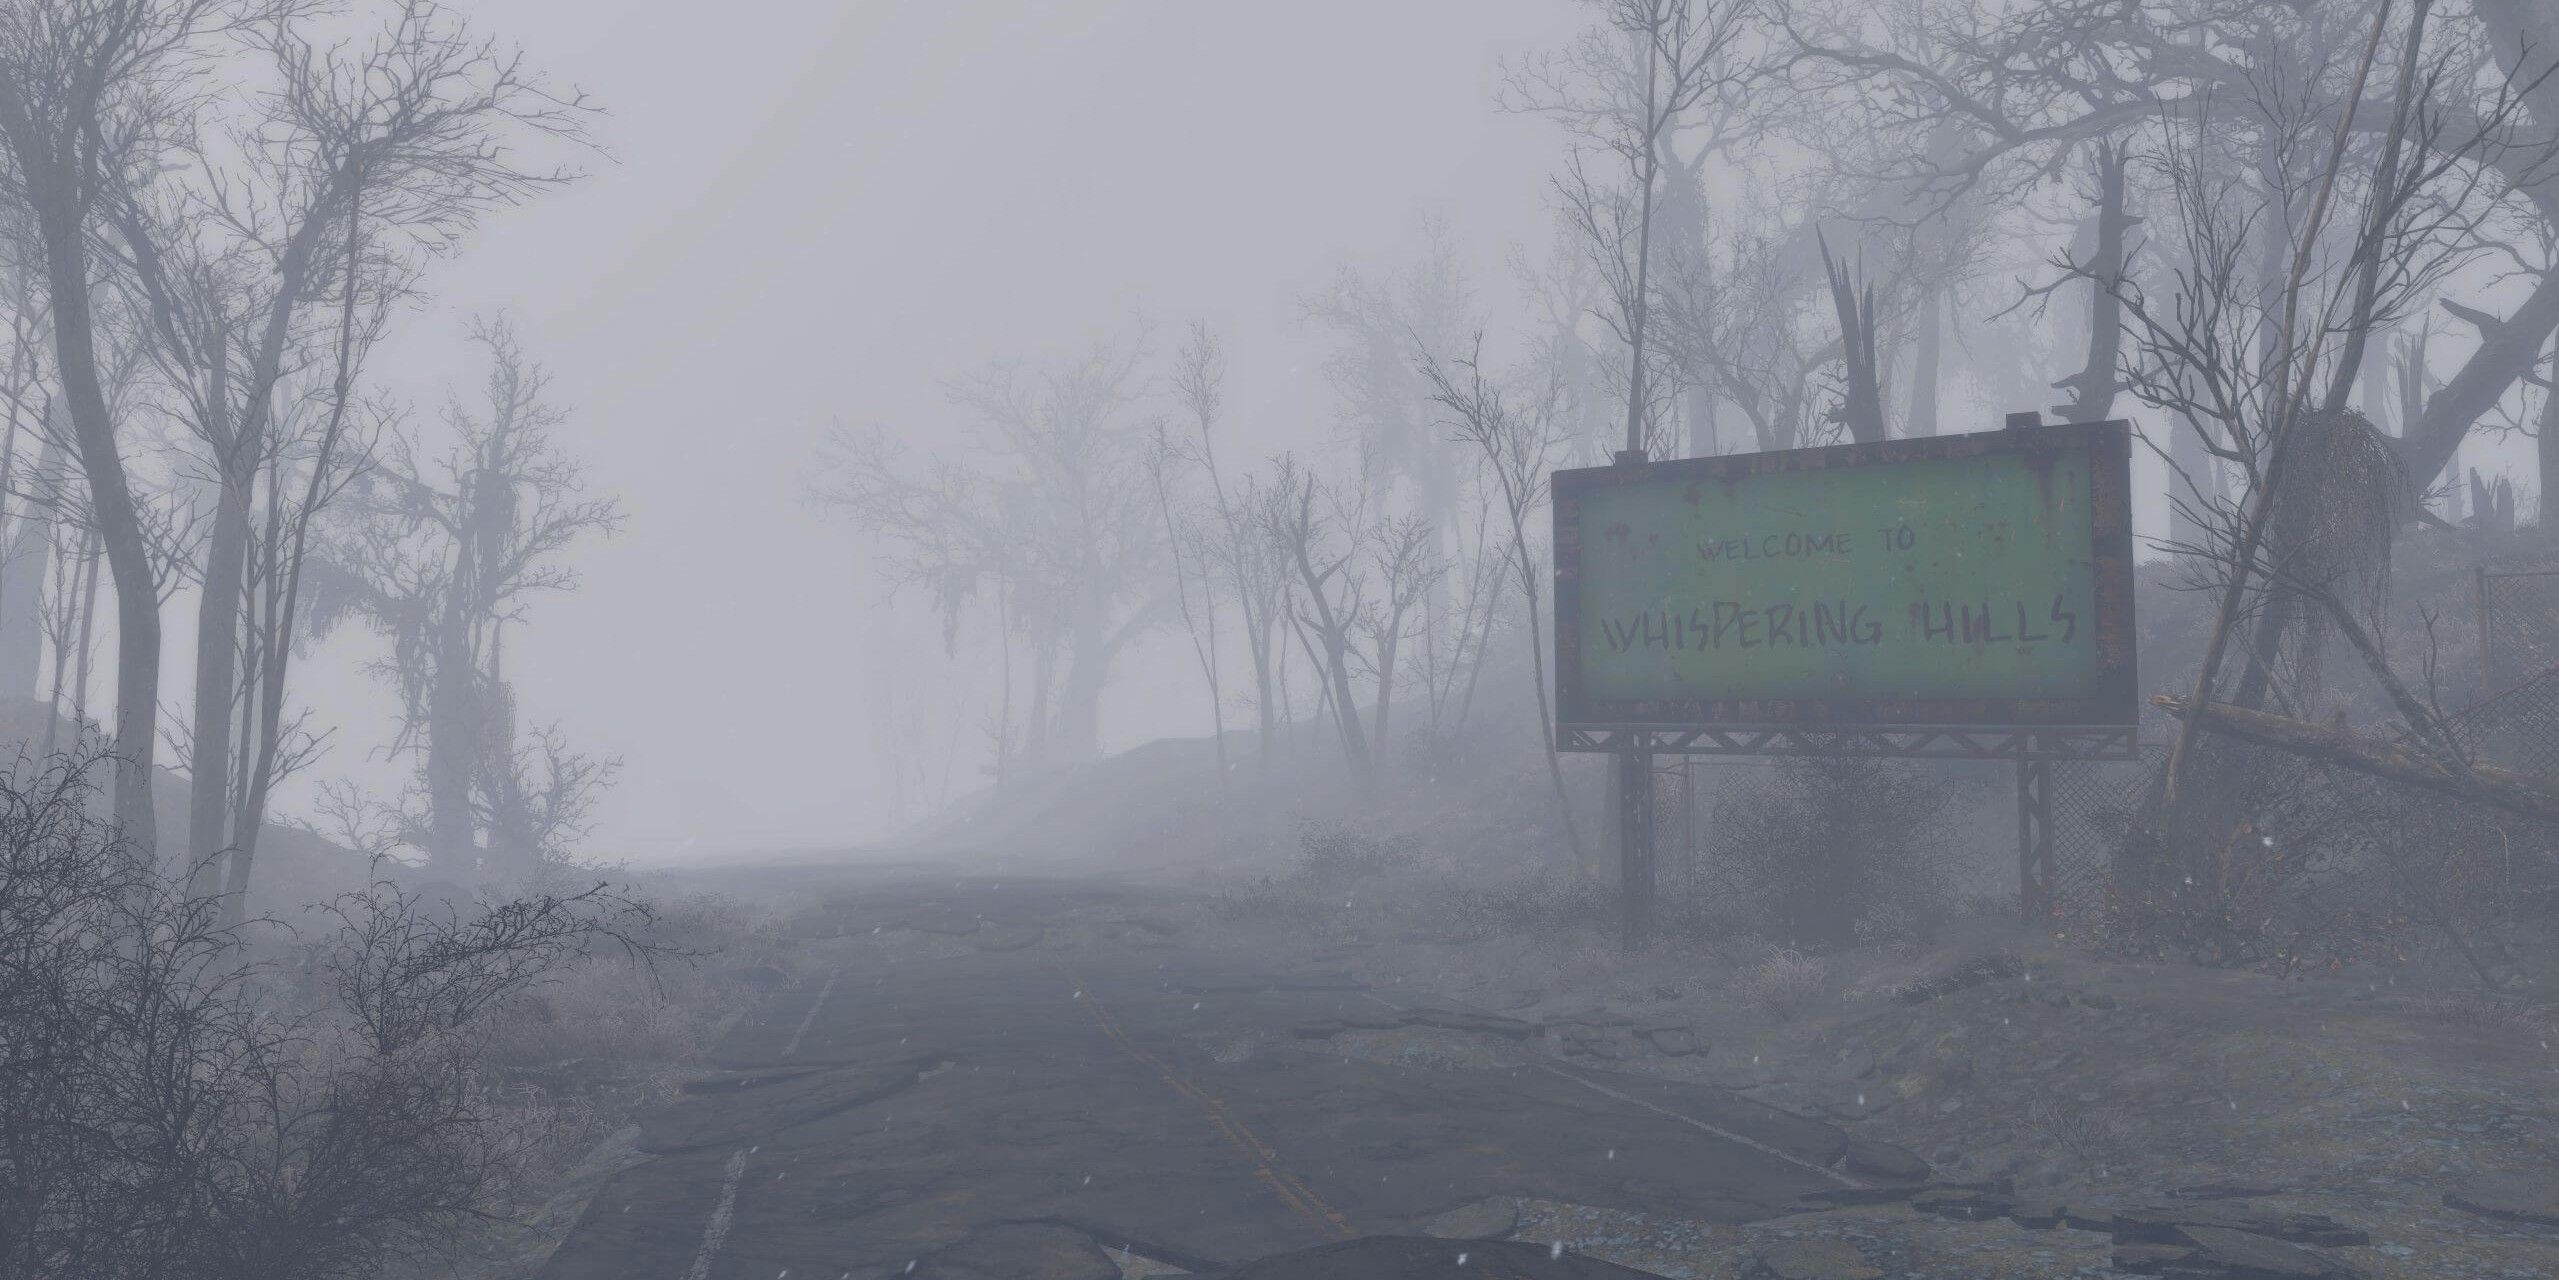 Fallout 4 mod Whispering hills